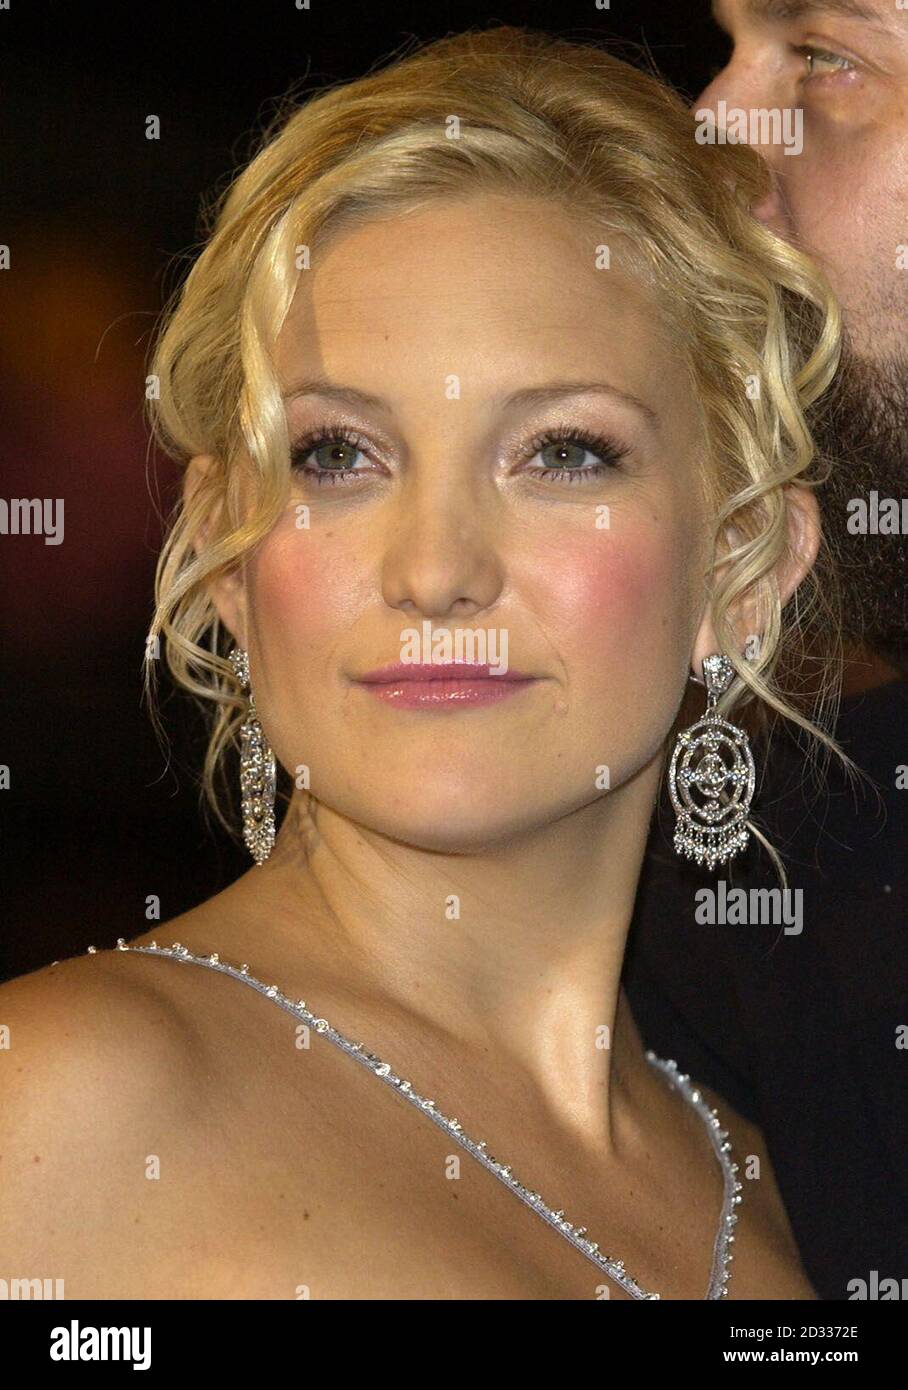 American actress Kate Hudson arrives at the Palazzo del Cinema, Lido, Venice, for their new film 'The Divorce', which will be screened as a special event at the 60th International Exhibition of Cinema Art, better known as Venice Film Festival. Stock Photo